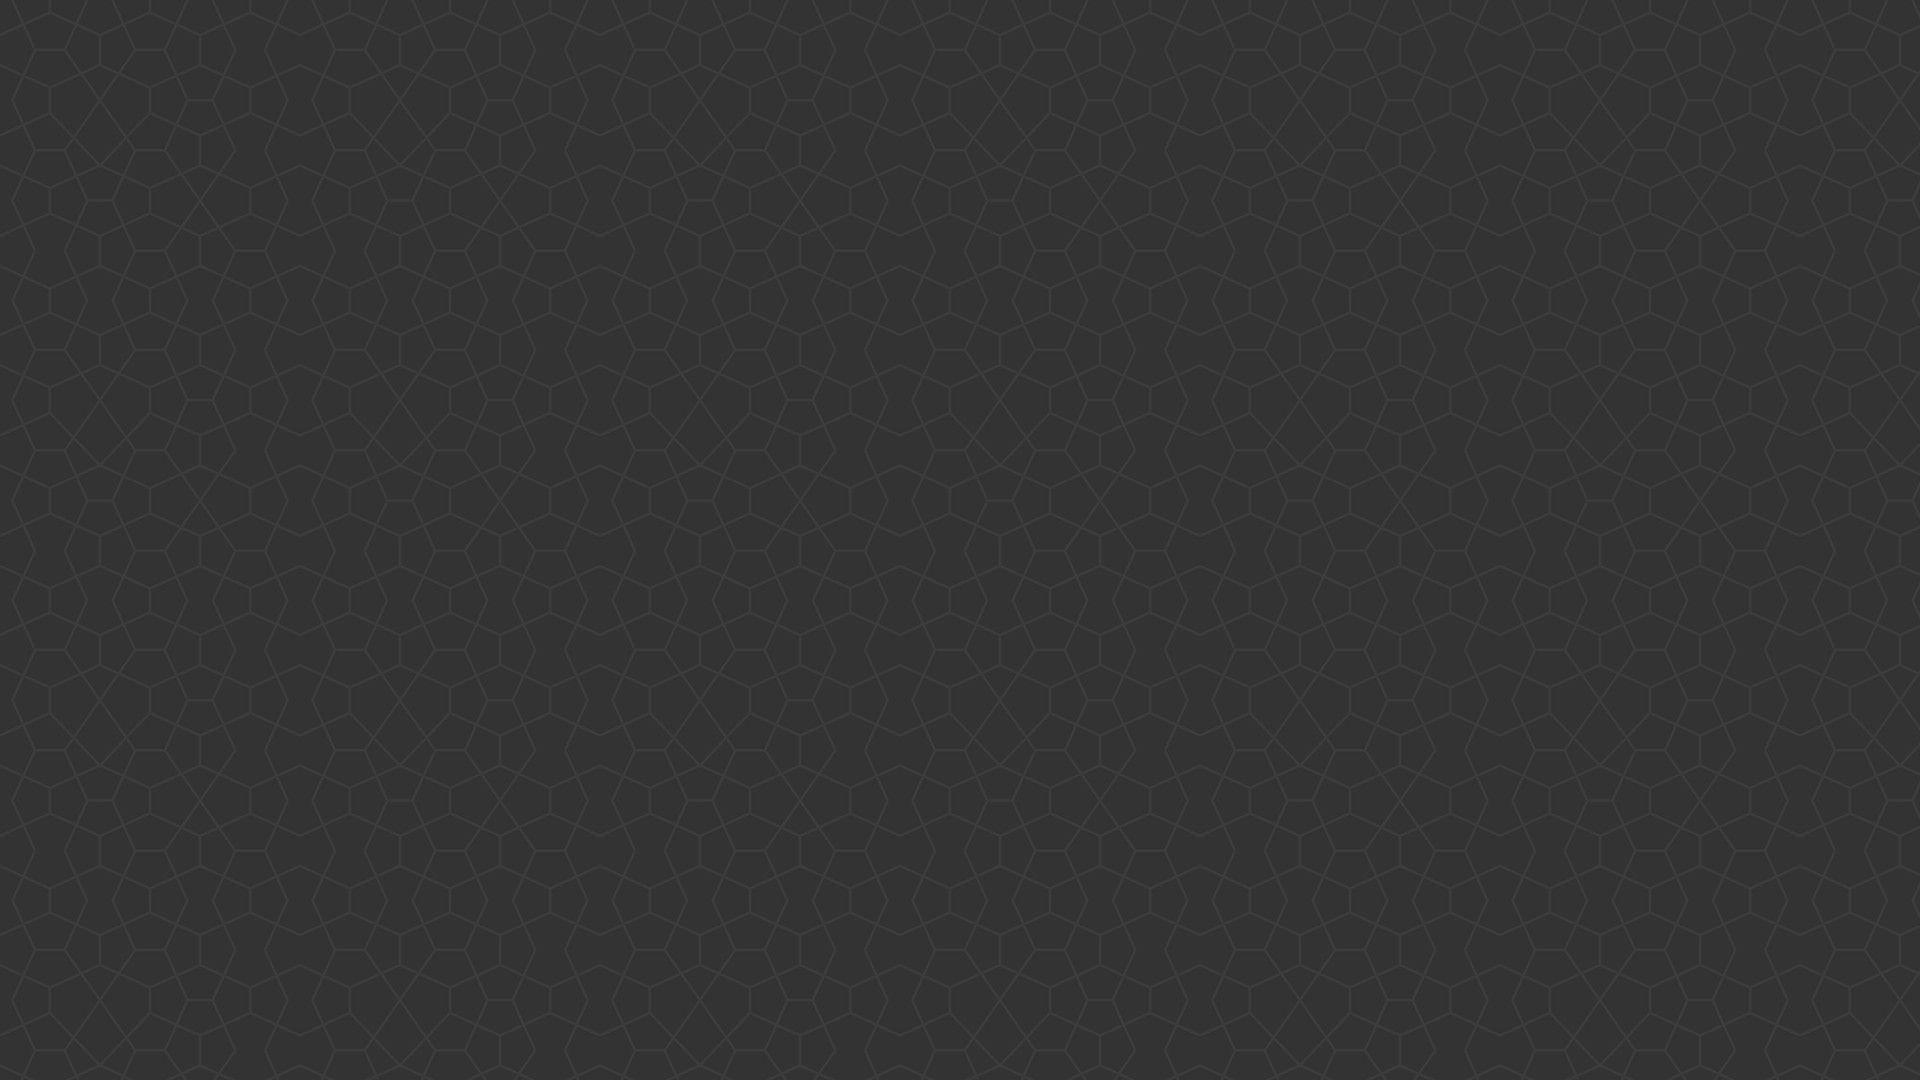 html background gradient with opaque pattern on top